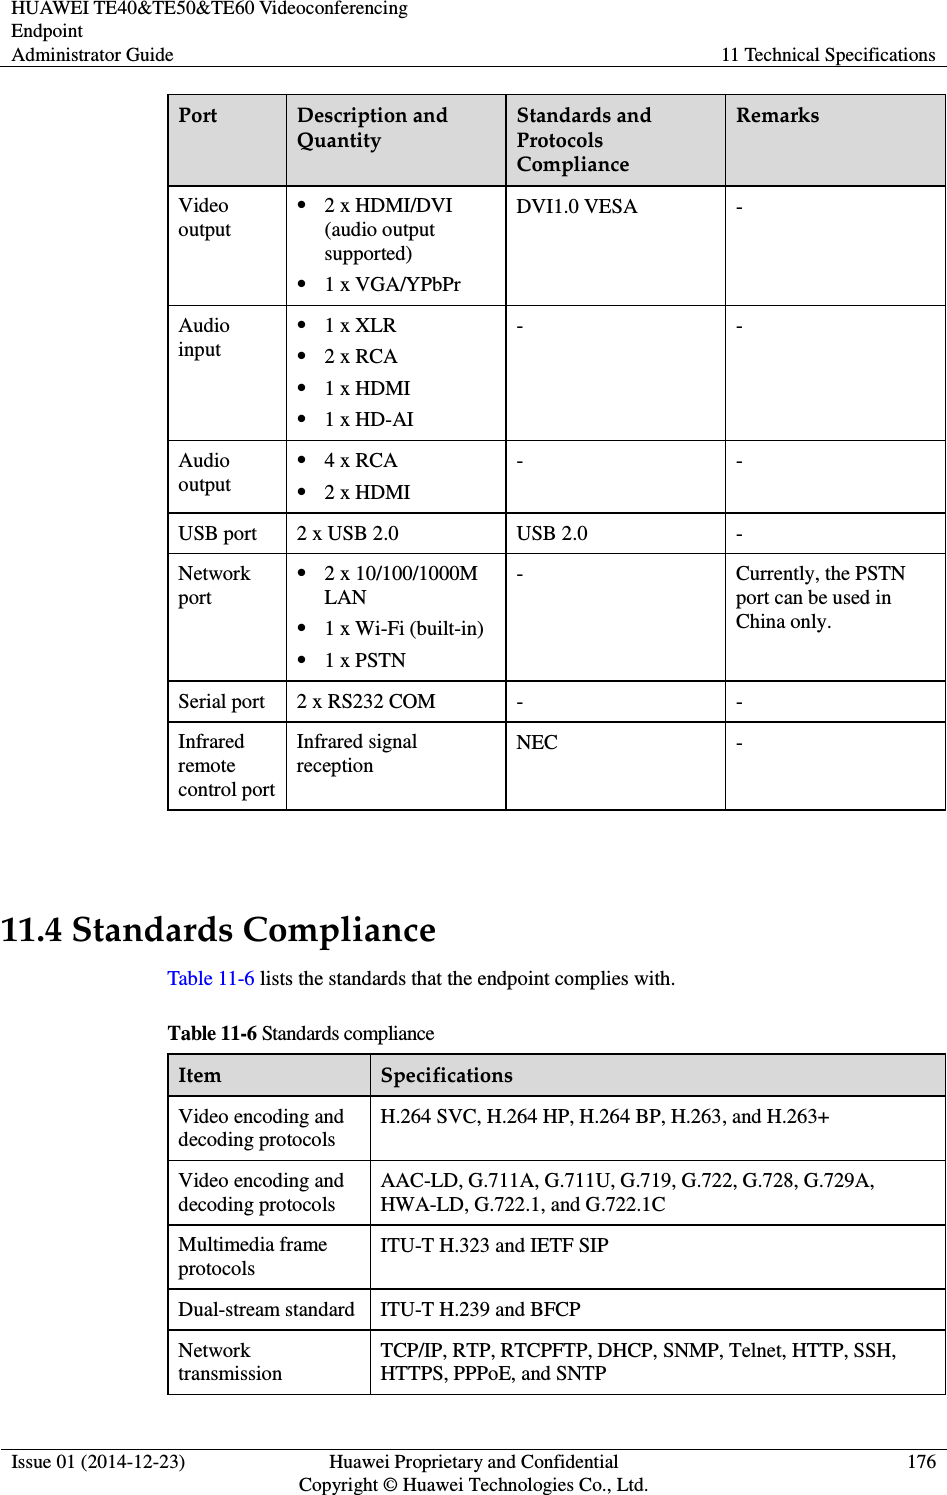 HUAWEI TE40&amp;TE50&amp;TE60 Videoconferencing Endpoint Administrator Guide  11 Technical Specifications  Issue 01 (2014-12-23)  Huawei Proprietary and Confidential                                     Copyright © Huawei Technologies Co., Ltd. 176  Port  Description and Quantity Standards and Protocols Compliance Remarks Video output  2 x HDMI/DVI (audio output supported)  1 x VGA/YPbPr DVI1.0 VESA  - Audio input  1 x XLR  2 x RCA  1 x HDMI  1 x HD-AI -  - Audio output  4 x RCA  2 x HDMI -  - USB port  2 x USB 2.0  USB 2.0  - Network port  2 x 10/100/1000M LAN  1 x Wi-Fi (built-in)  1 x PSTN -  Currently, the PSTN port can be used in China only. Serial port  2 x RS232 COM  -  - Infrared remote control port Infrared signal reception NEC  -  11.4 Standards Compliance Table 11-6 lists the standards that the endpoint complies with. Table 11-6 Standards compliance Item  Specifications Video encoding and decoding protocols H.264 SVC, H.264 HP, H.264 BP, H.263, and H.263+ Video encoding and decoding protocols AAC-LD, G.711A, G.711U, G.719, G.722, G.728, G.729A, HWA-LD, G.722.1, and G.722.1C Multimedia frame protocols ITU-T H.323 and IETF SIP Dual-stream standard  ITU-T H.239 and BFCP Network transmission TCP/IP, RTP, RTCPFTP, DHCP, SNMP, Telnet, HTTP, SSH, HTTPS, PPPoE, and SNTP 